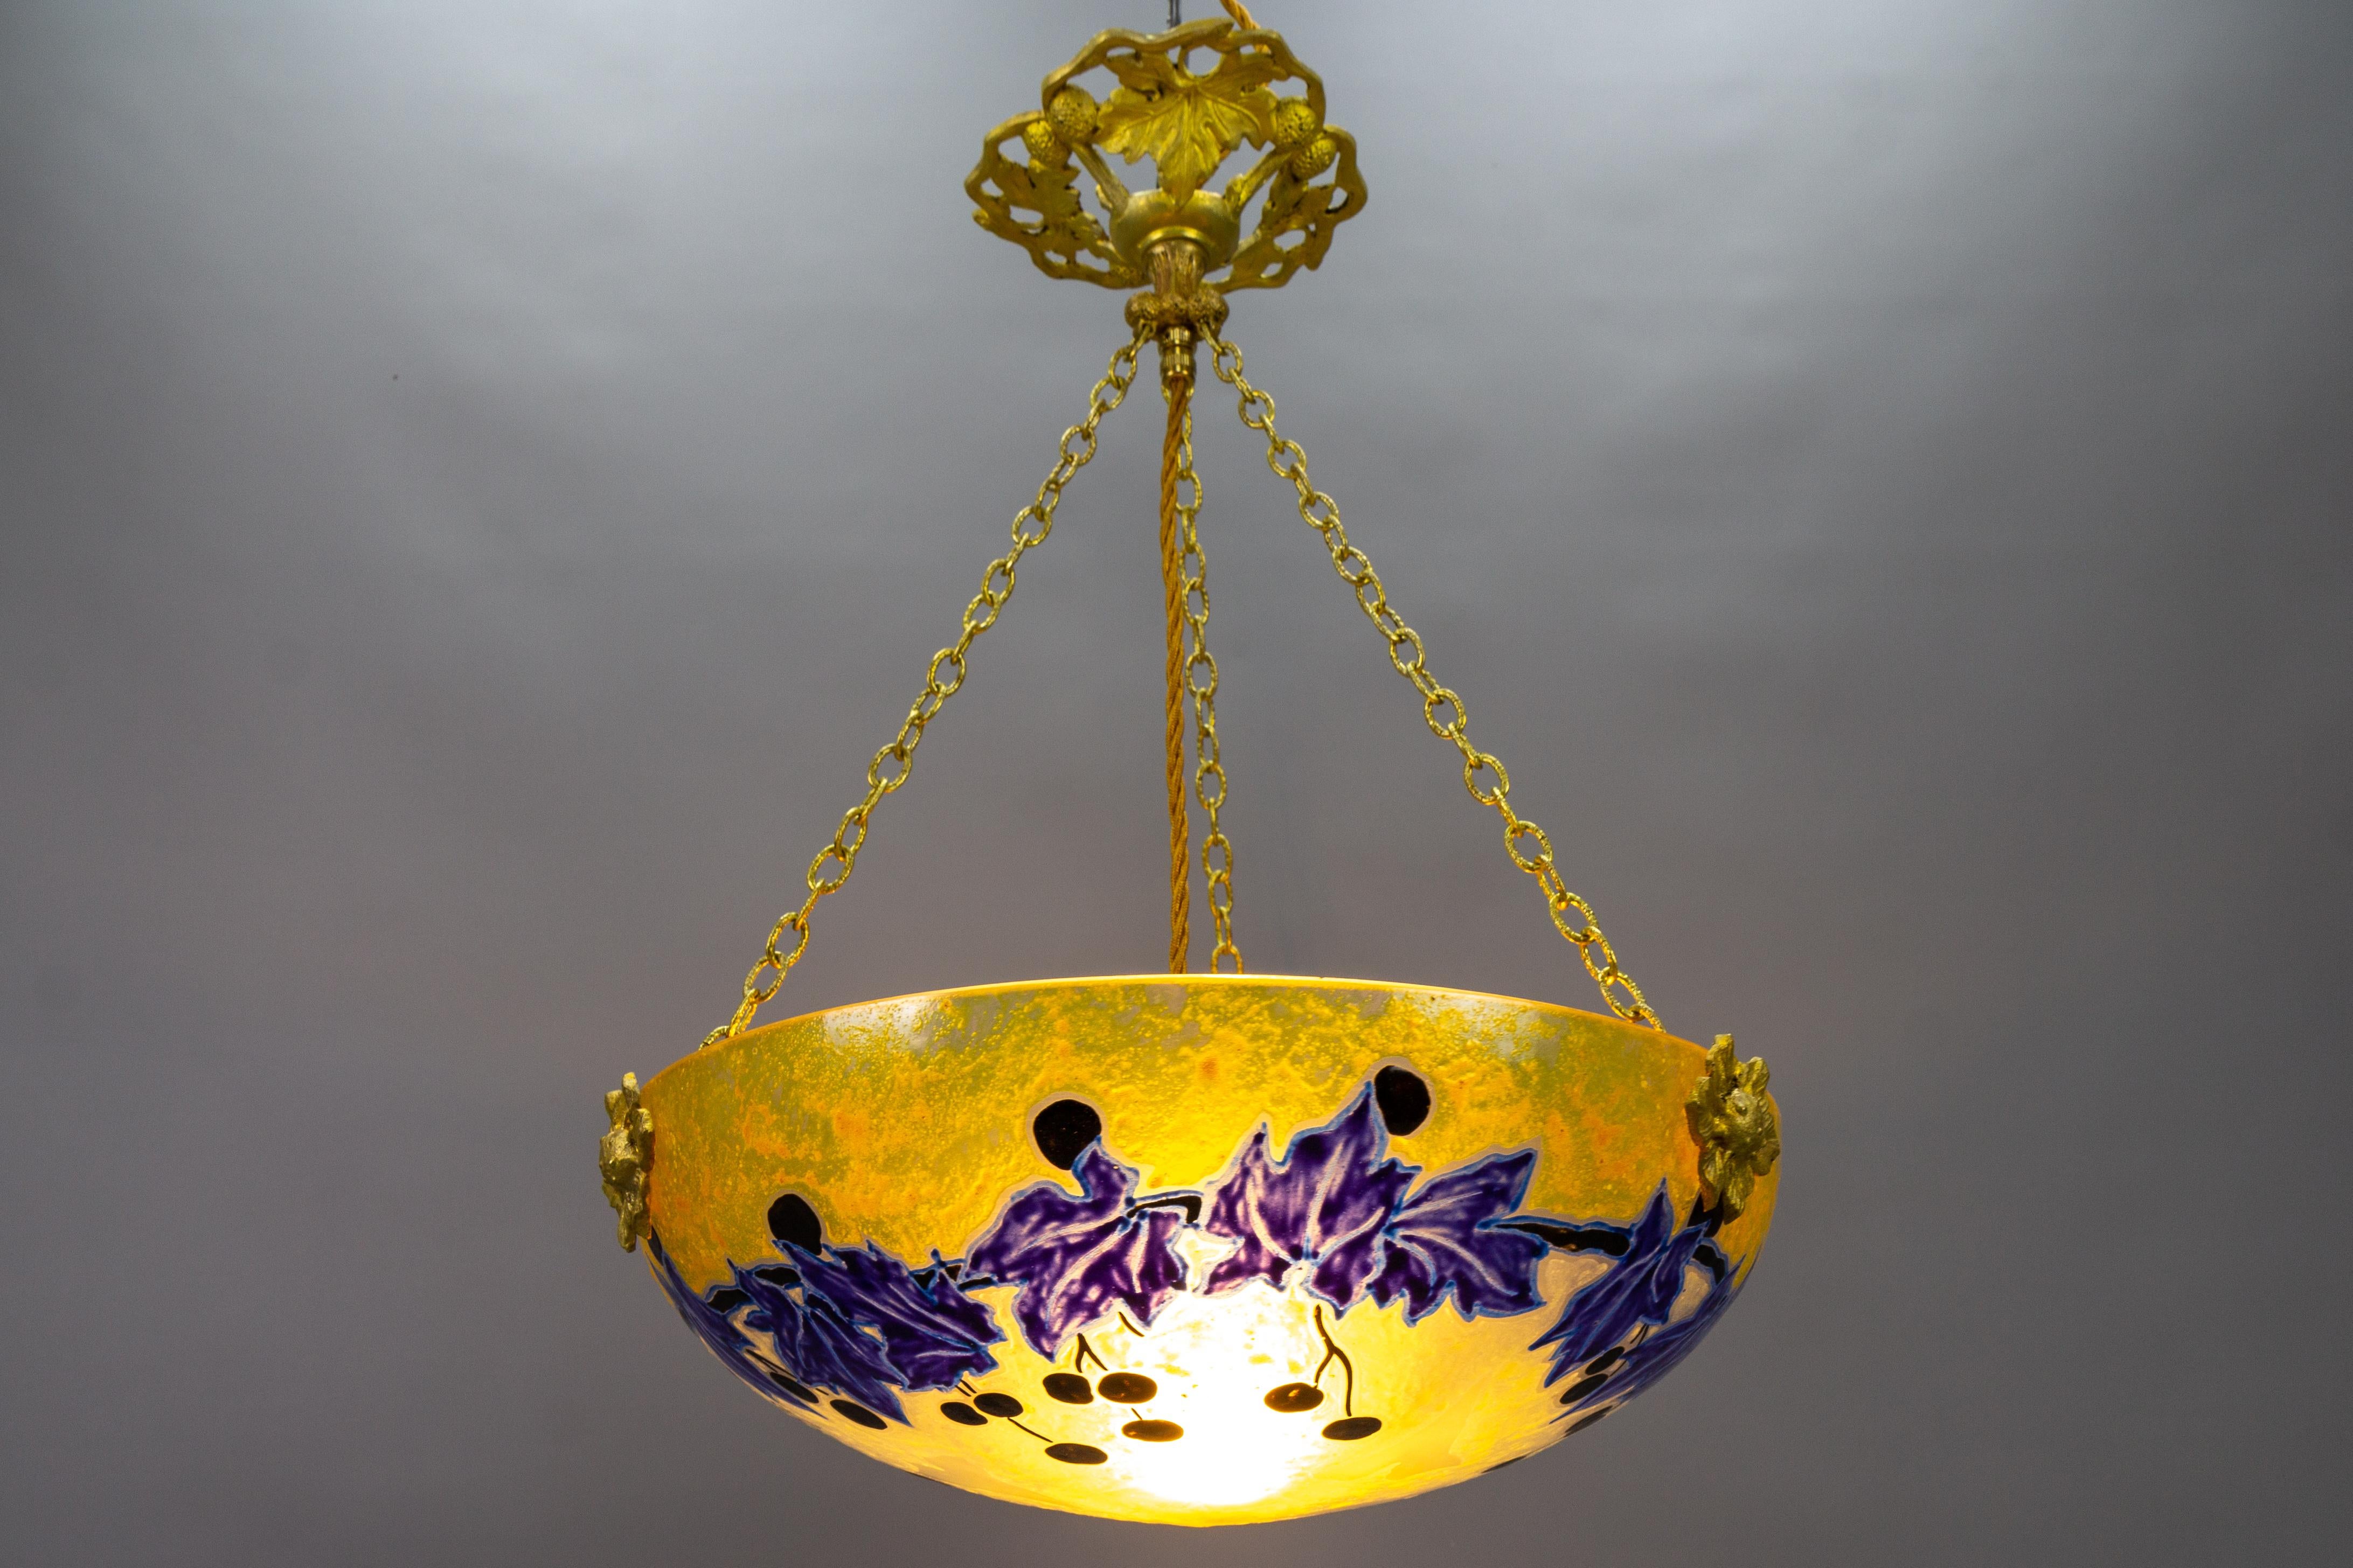 French Art Nouveau Pendant Light with Yellow and Blue Glass Ivy Motifs by Legras For Sale 4